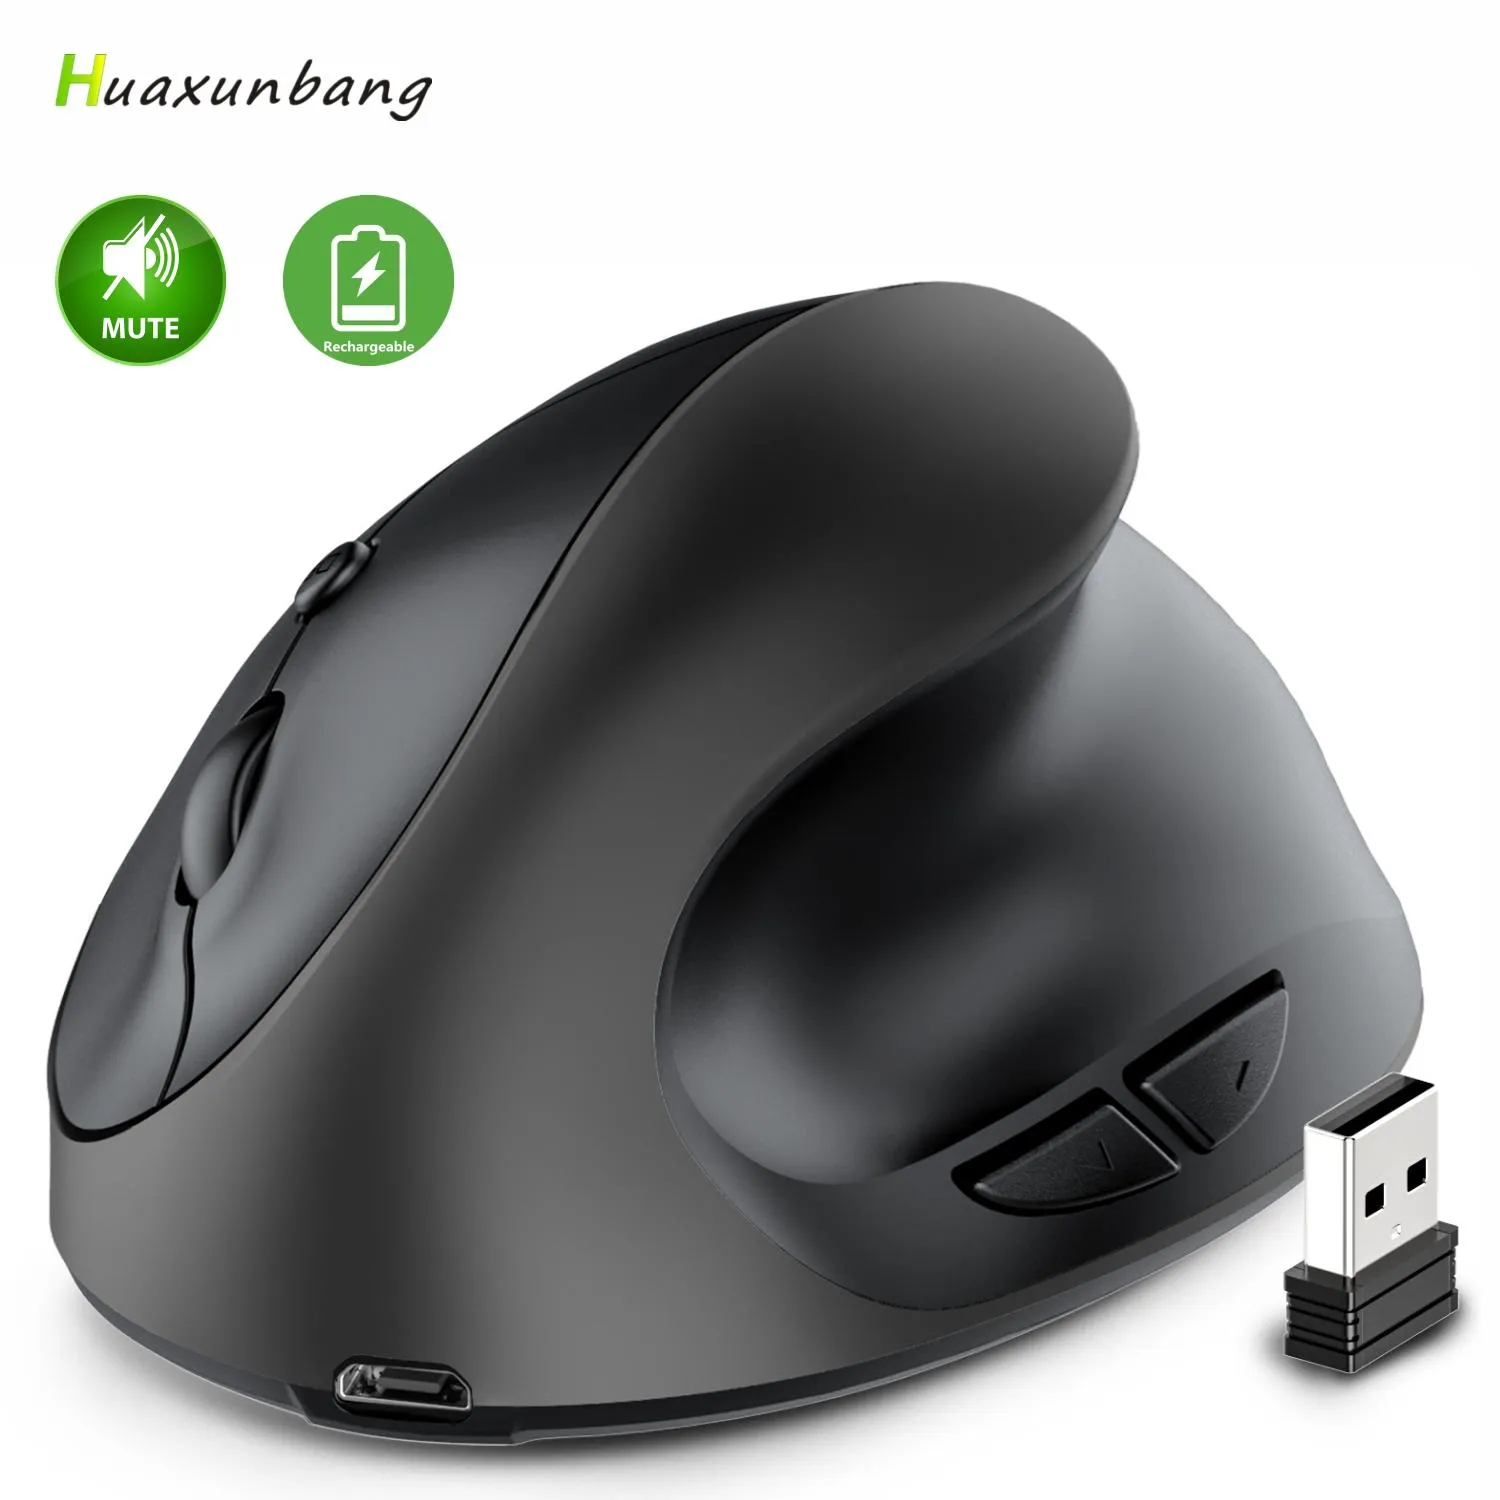 Mice Rechargeable Vertical Ergonomic Wireless Gaming Mouse For Computer Laptop PC 2.4ghz Optical USB Gamer Mause DPI Silent Game Mice